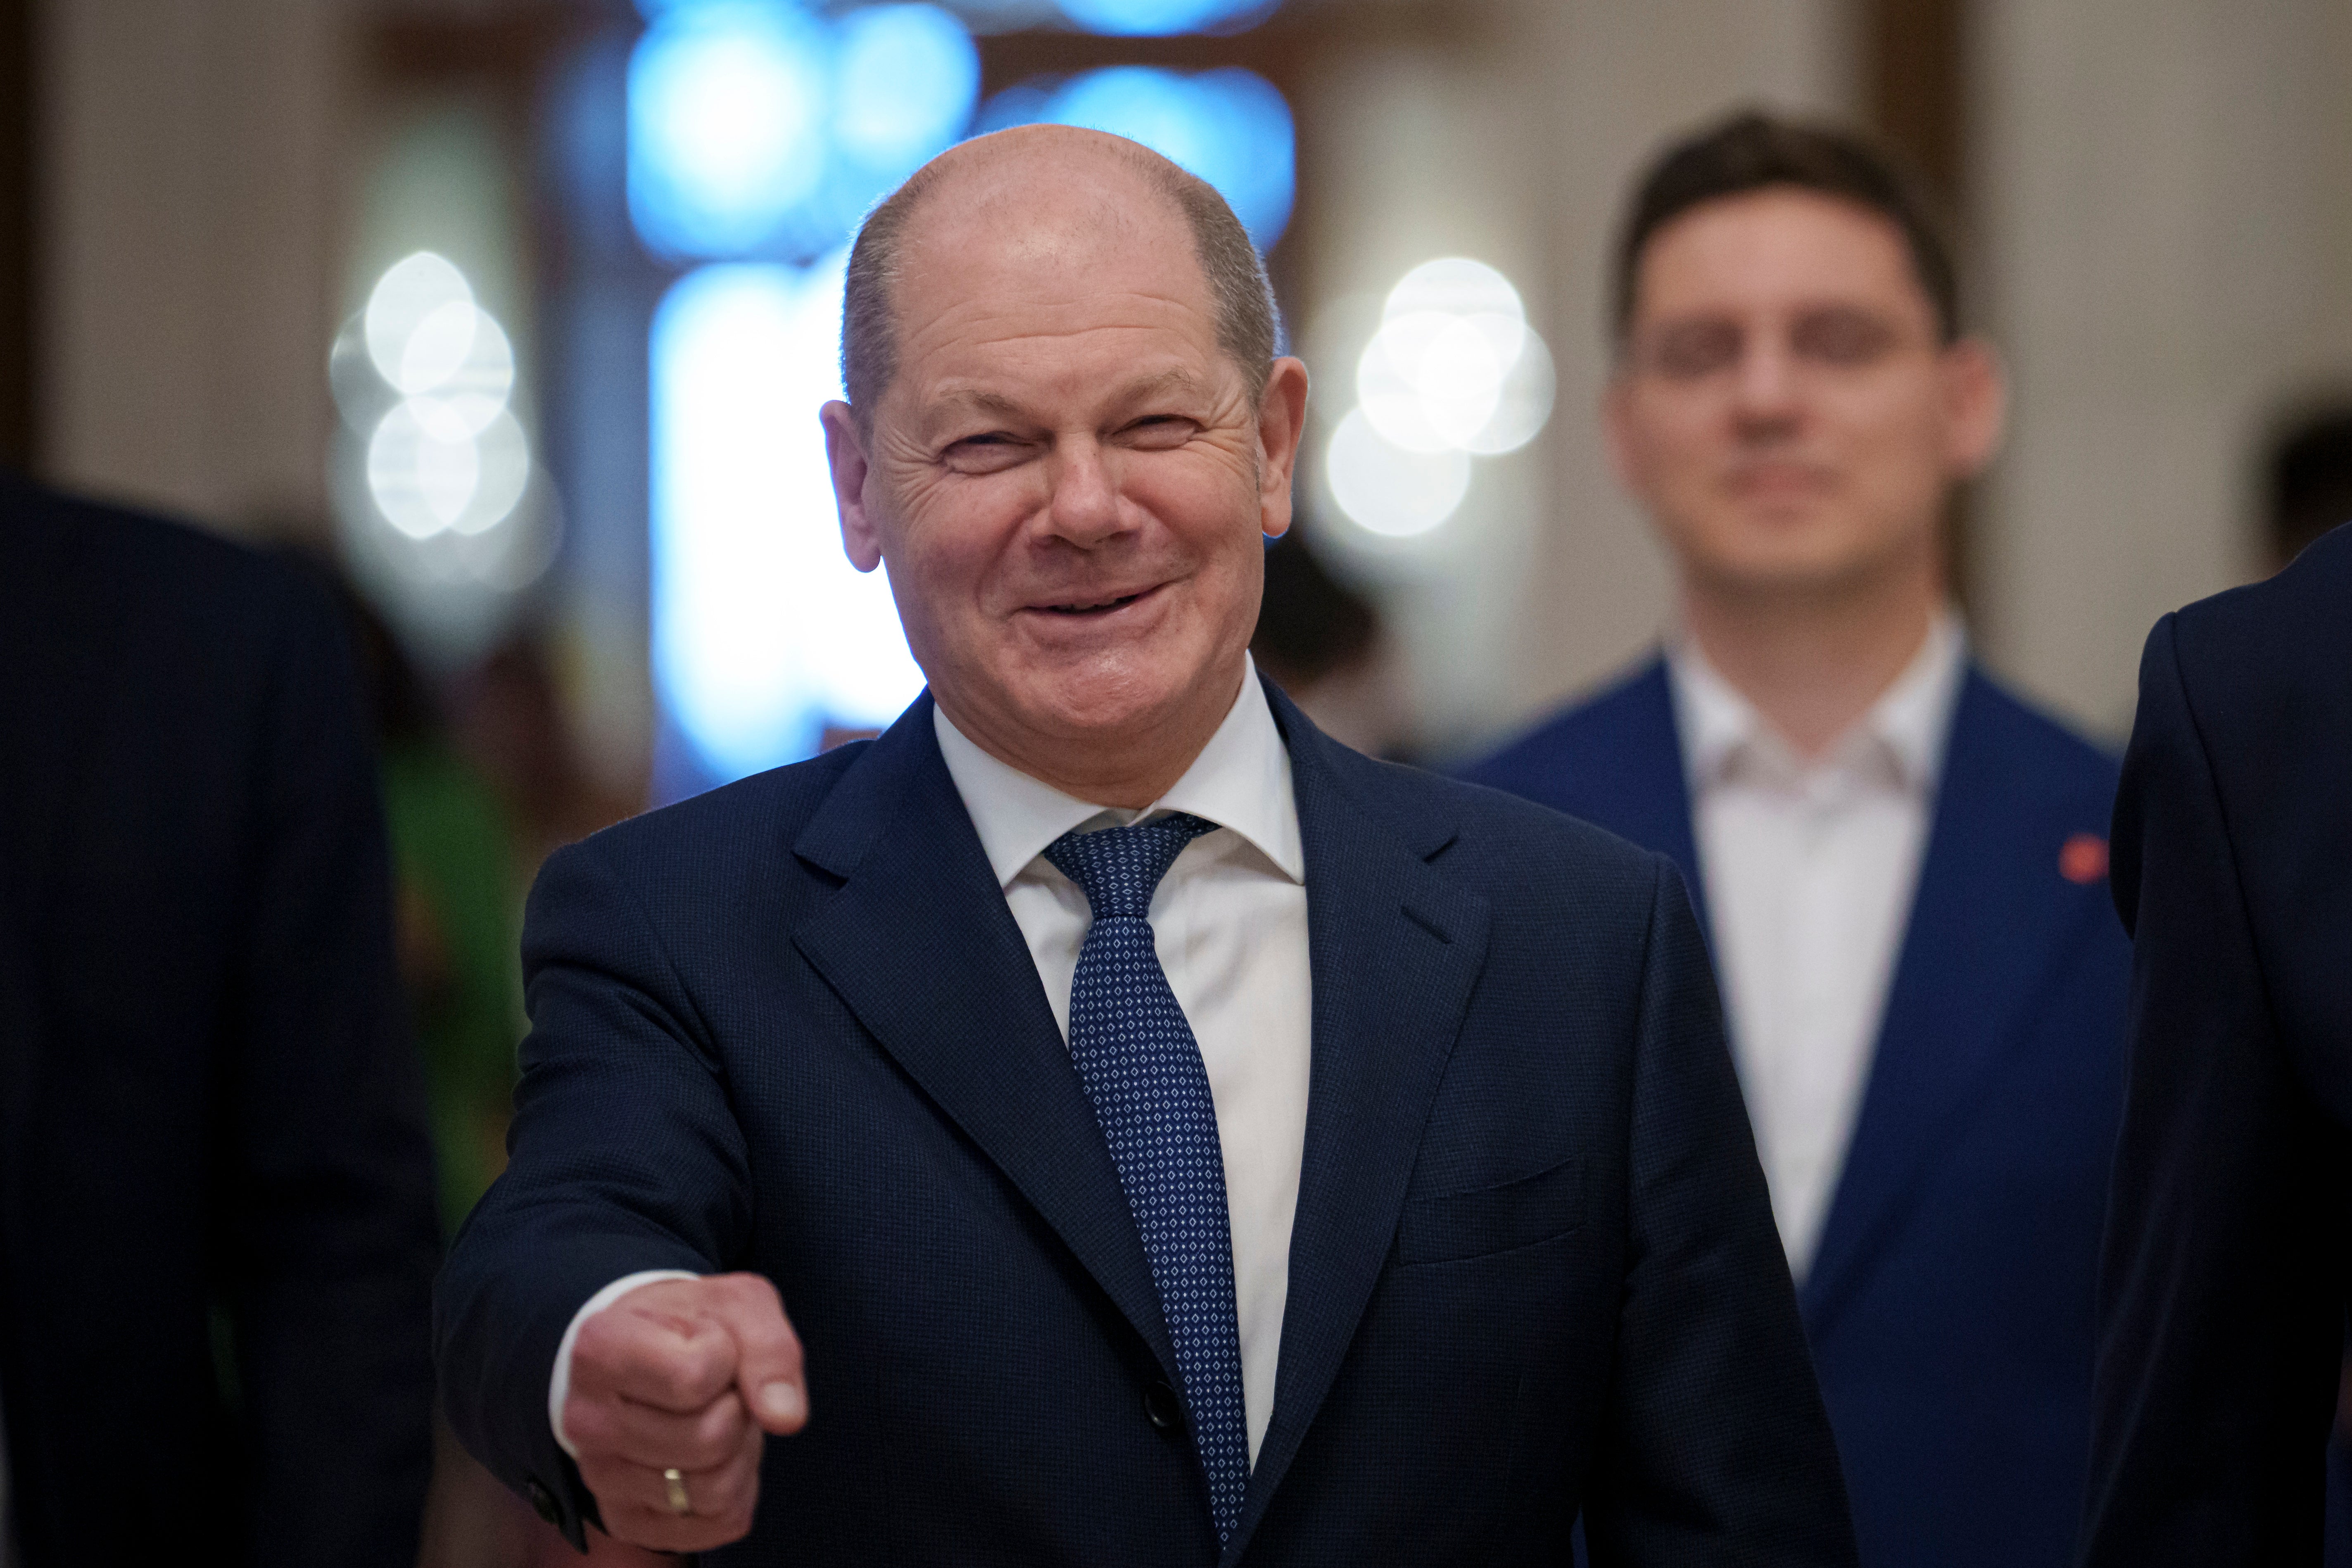 Olaf Scholz travelled to China on Sunday amid growing tensions